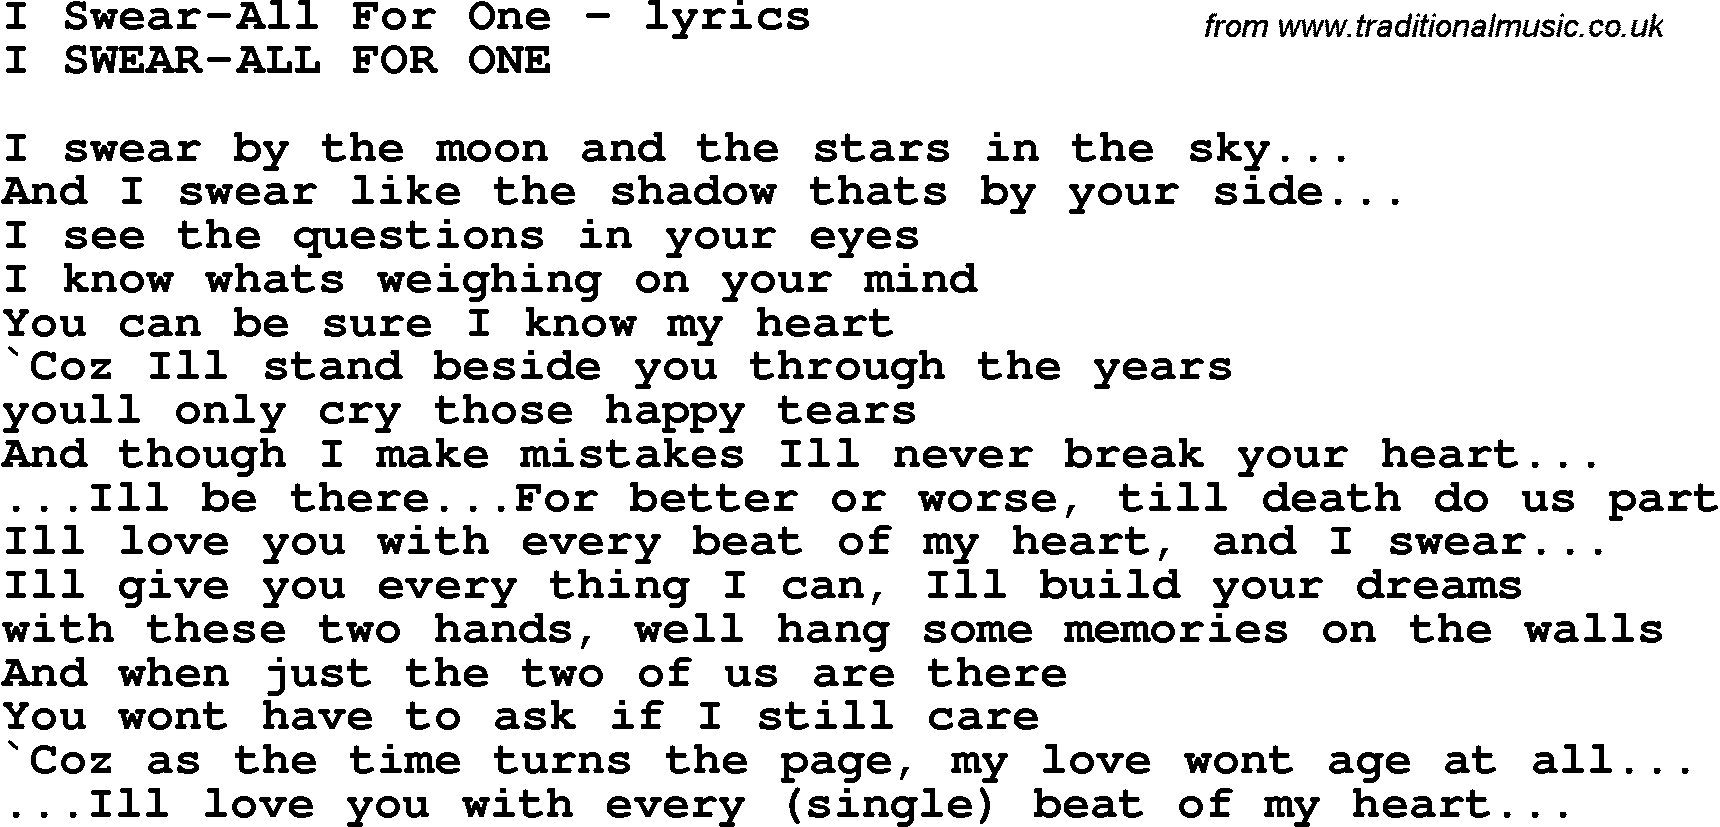 Love Song Lyrics for: I Swear-All For One